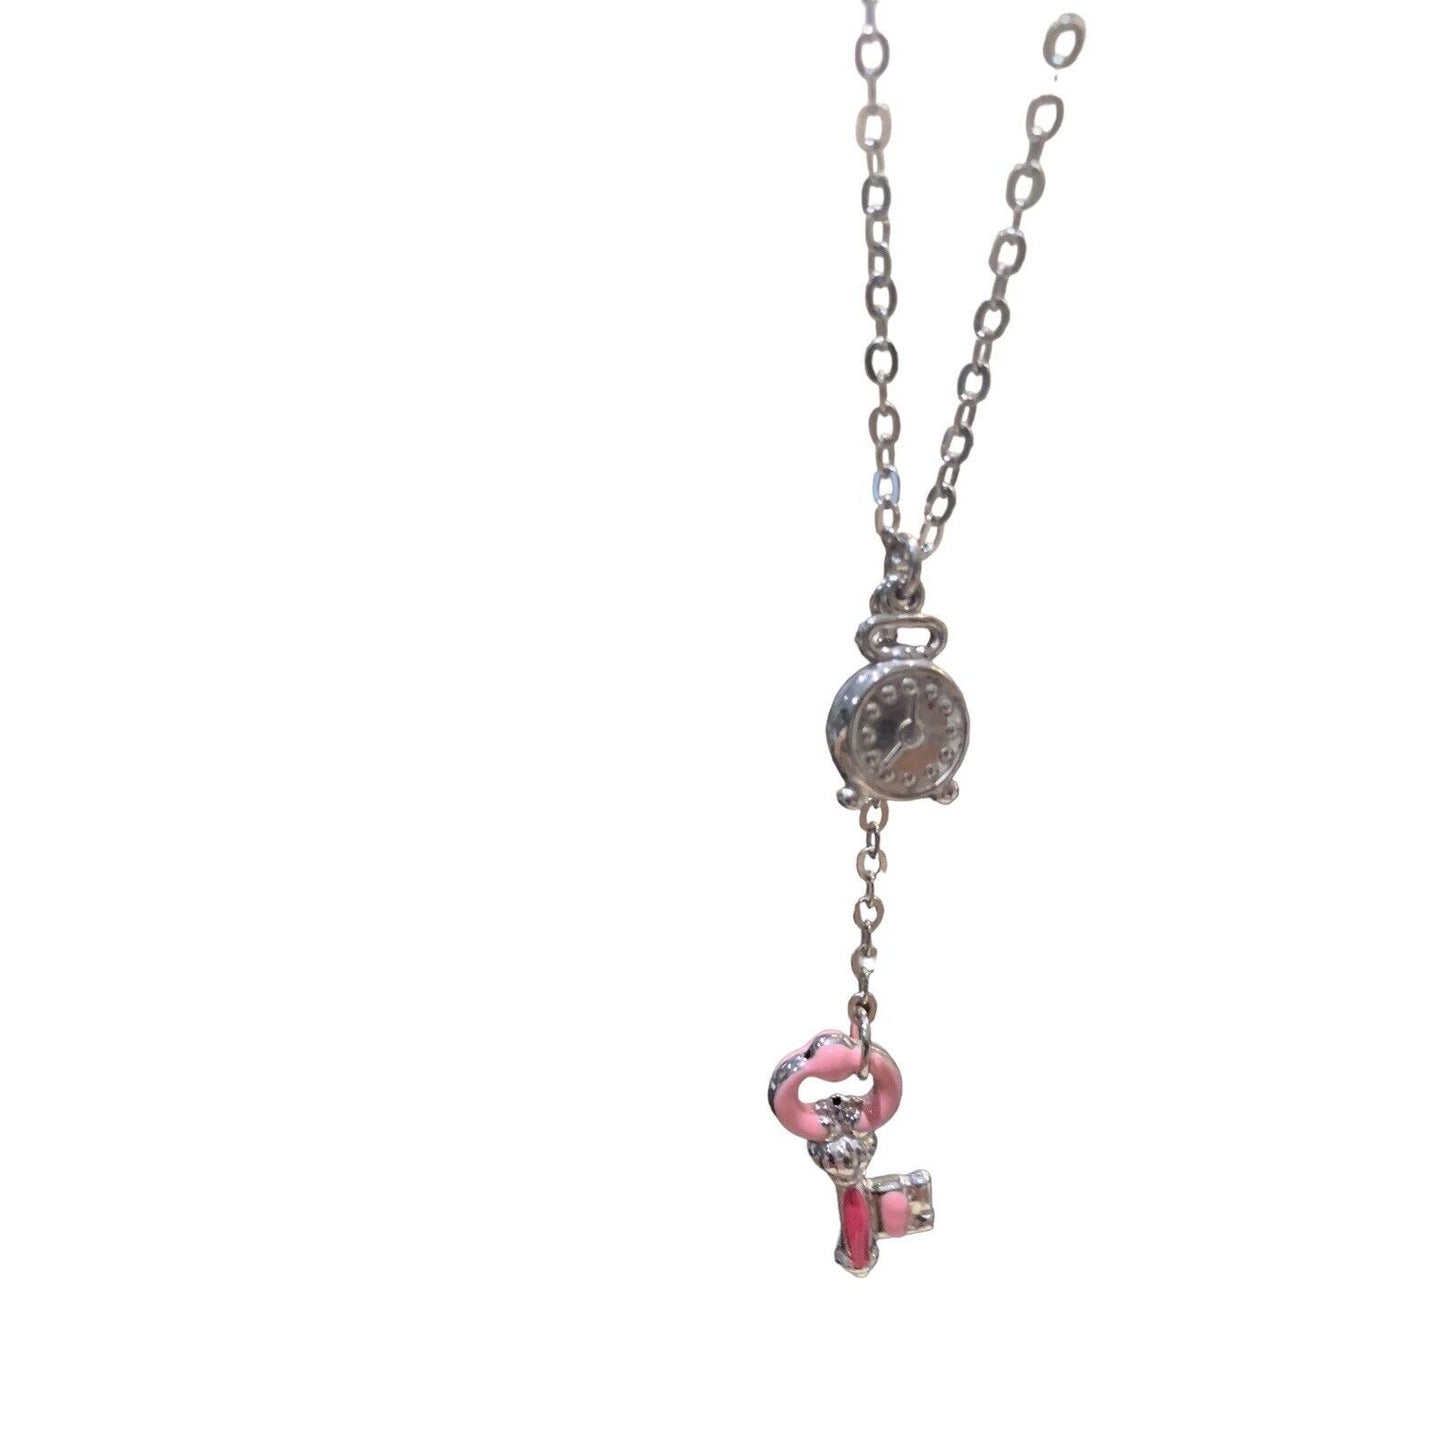 Canipelli Firenze Palladium Plated with Pink Enamel Key Charm Necklace